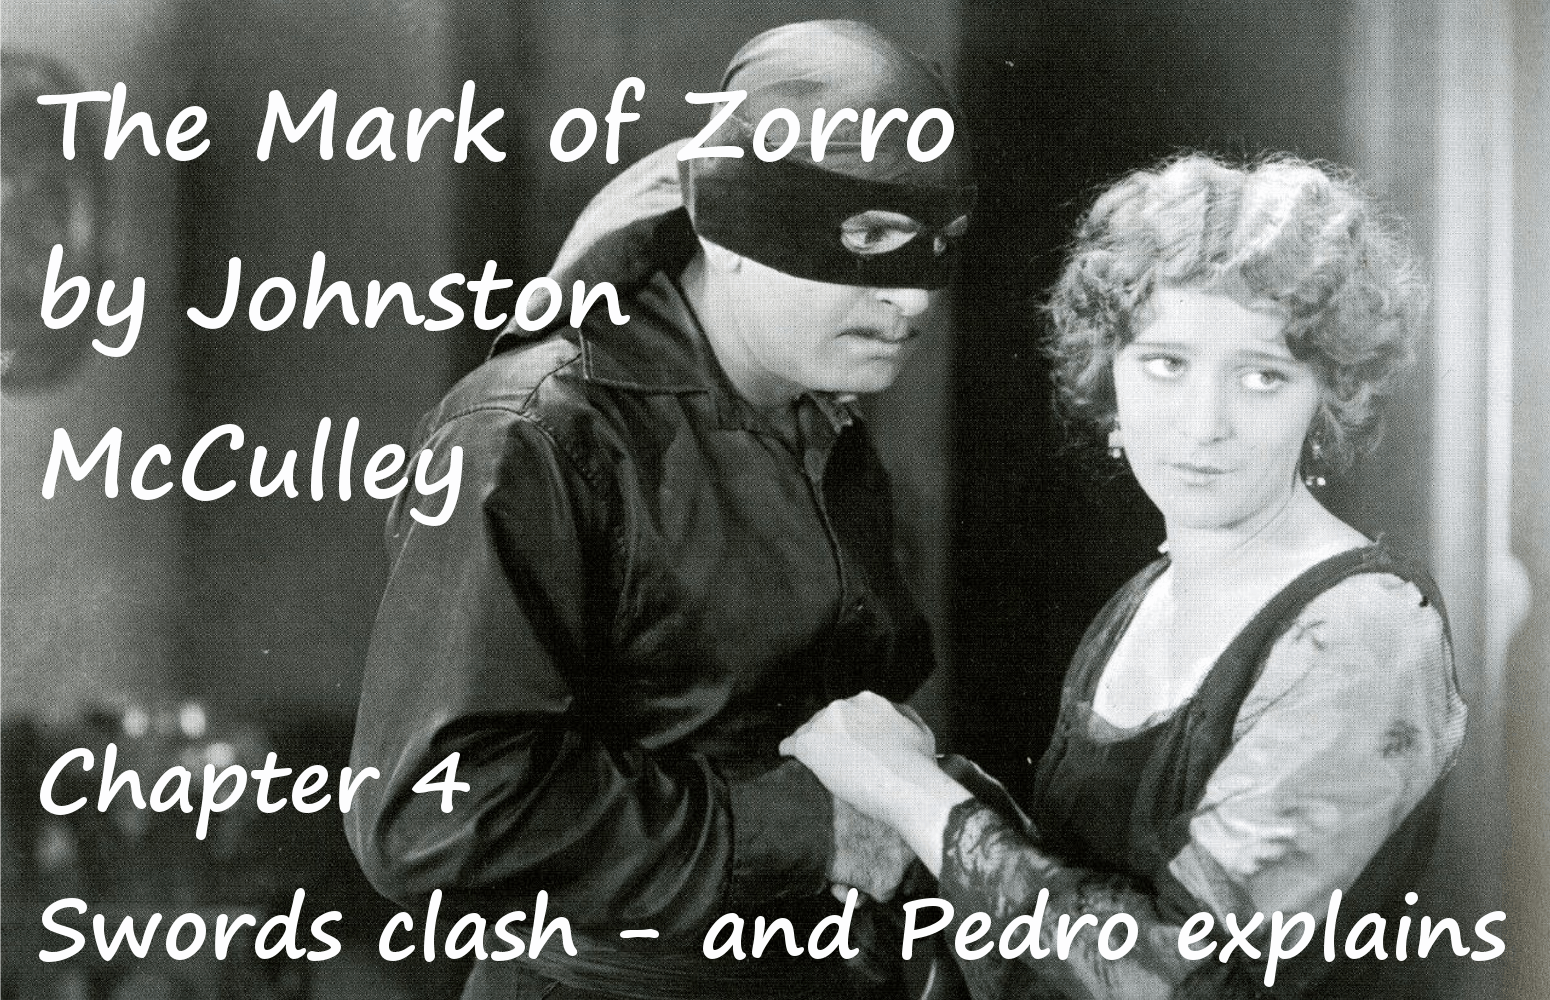 The Mark of Zorro chapter 4 Swords clash - and Pedro explains by Johnston McCulley